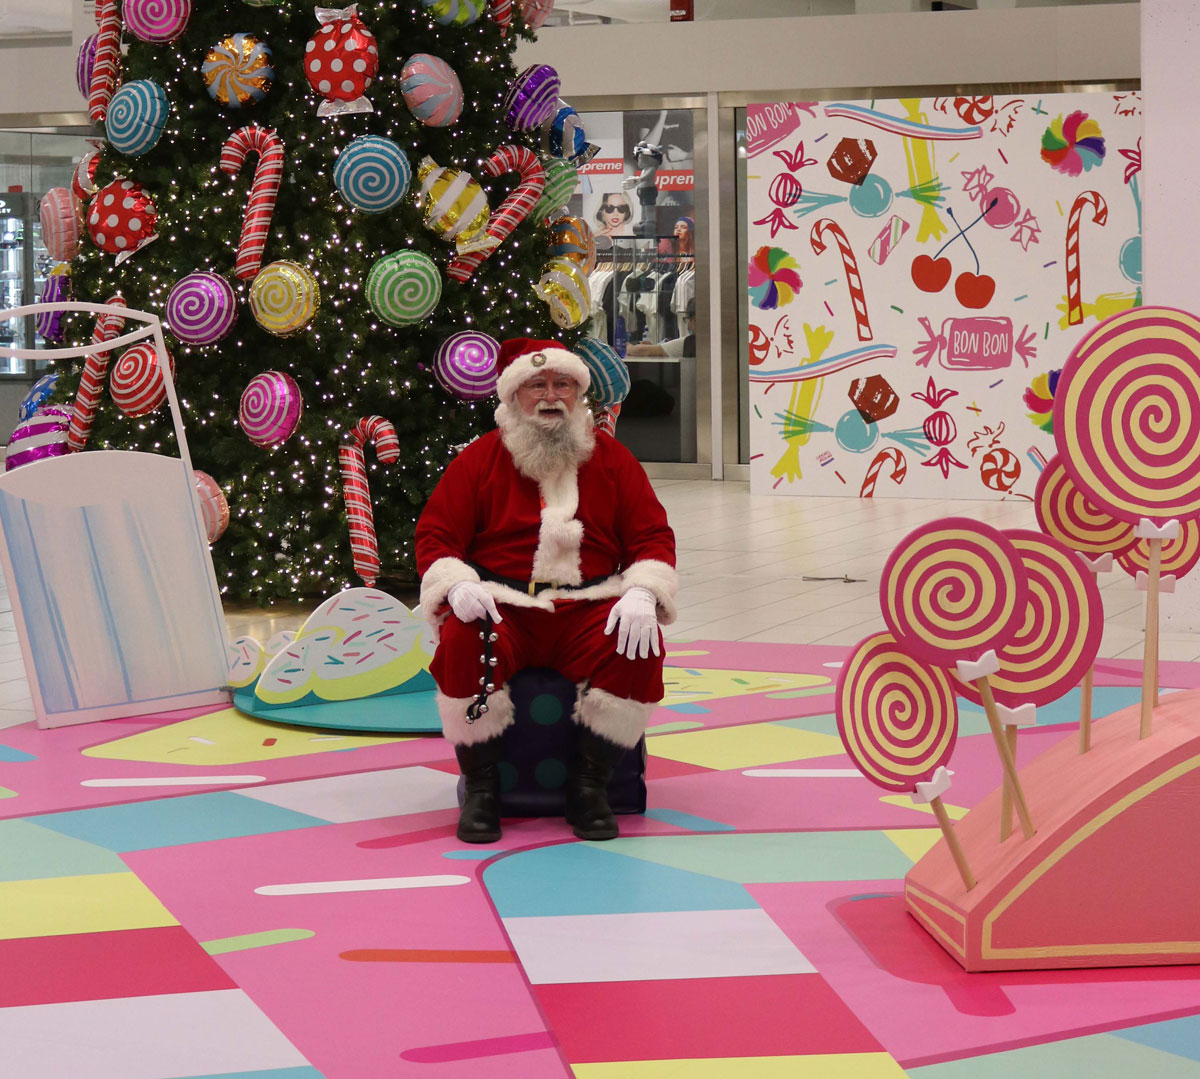 New-Horizon-Mall-offering-something-sweet-this-holiday-season-pic-1